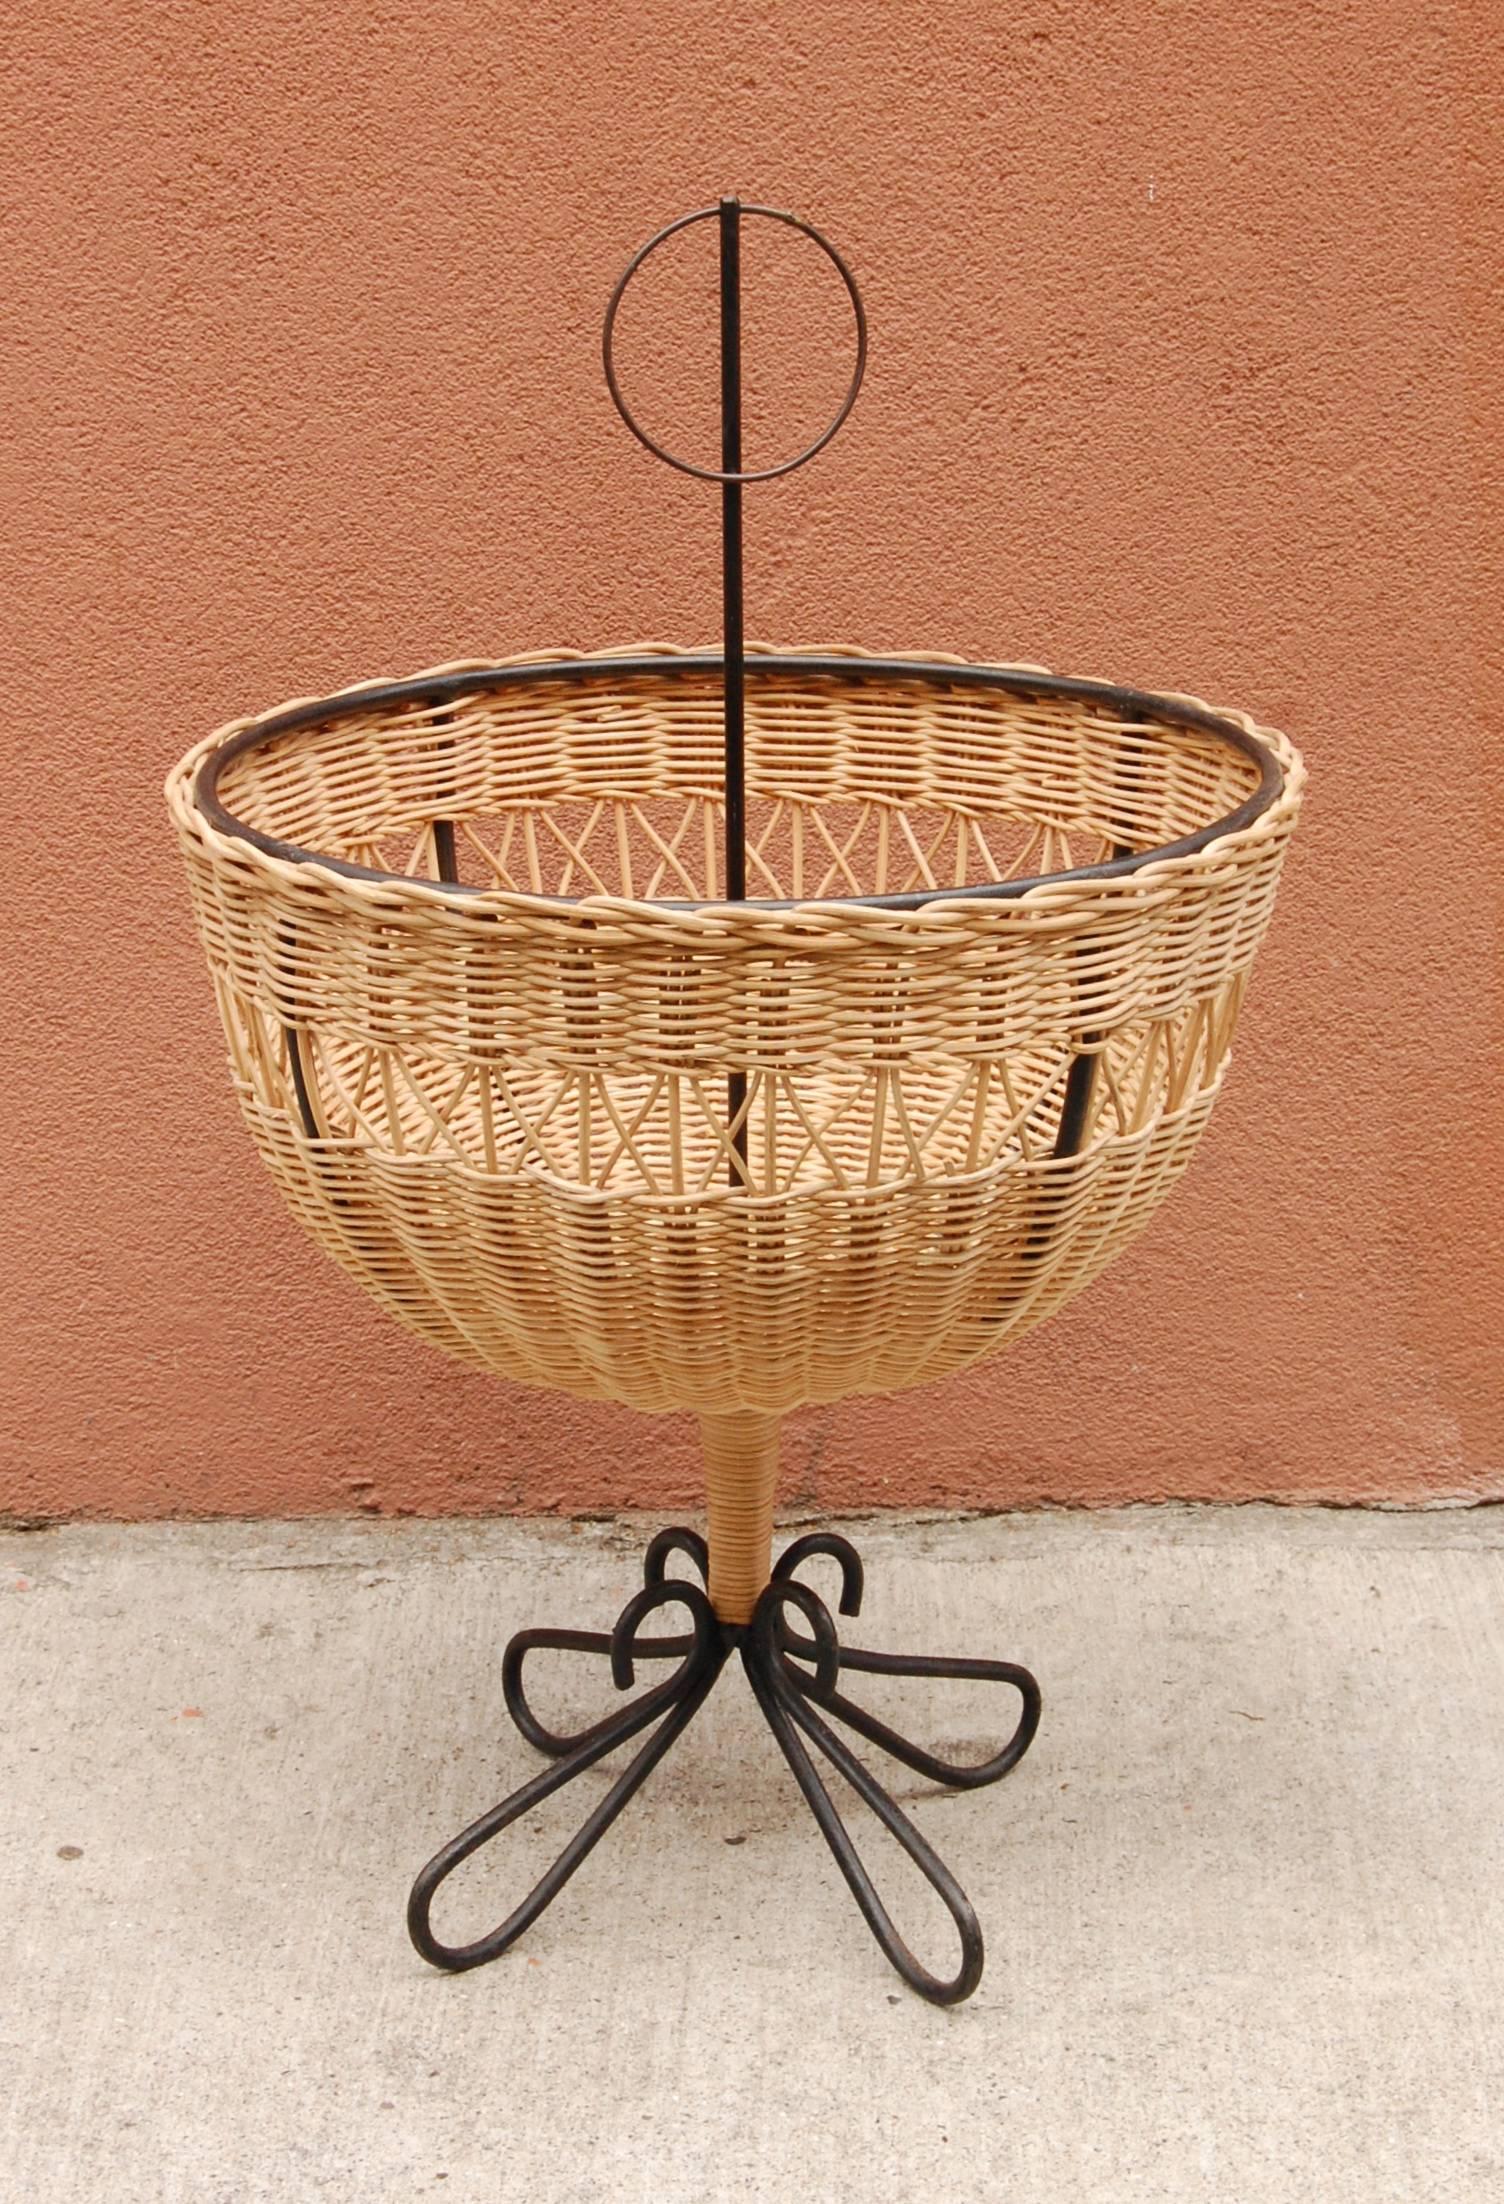 Handcrafted iron and wicker fruit basket from the 1960s, sculptural iron work to the feet having graceful curves. The wicker is in perfect condition without any breaks to it or other damage. A striking centerpiece for the dining or entry table.